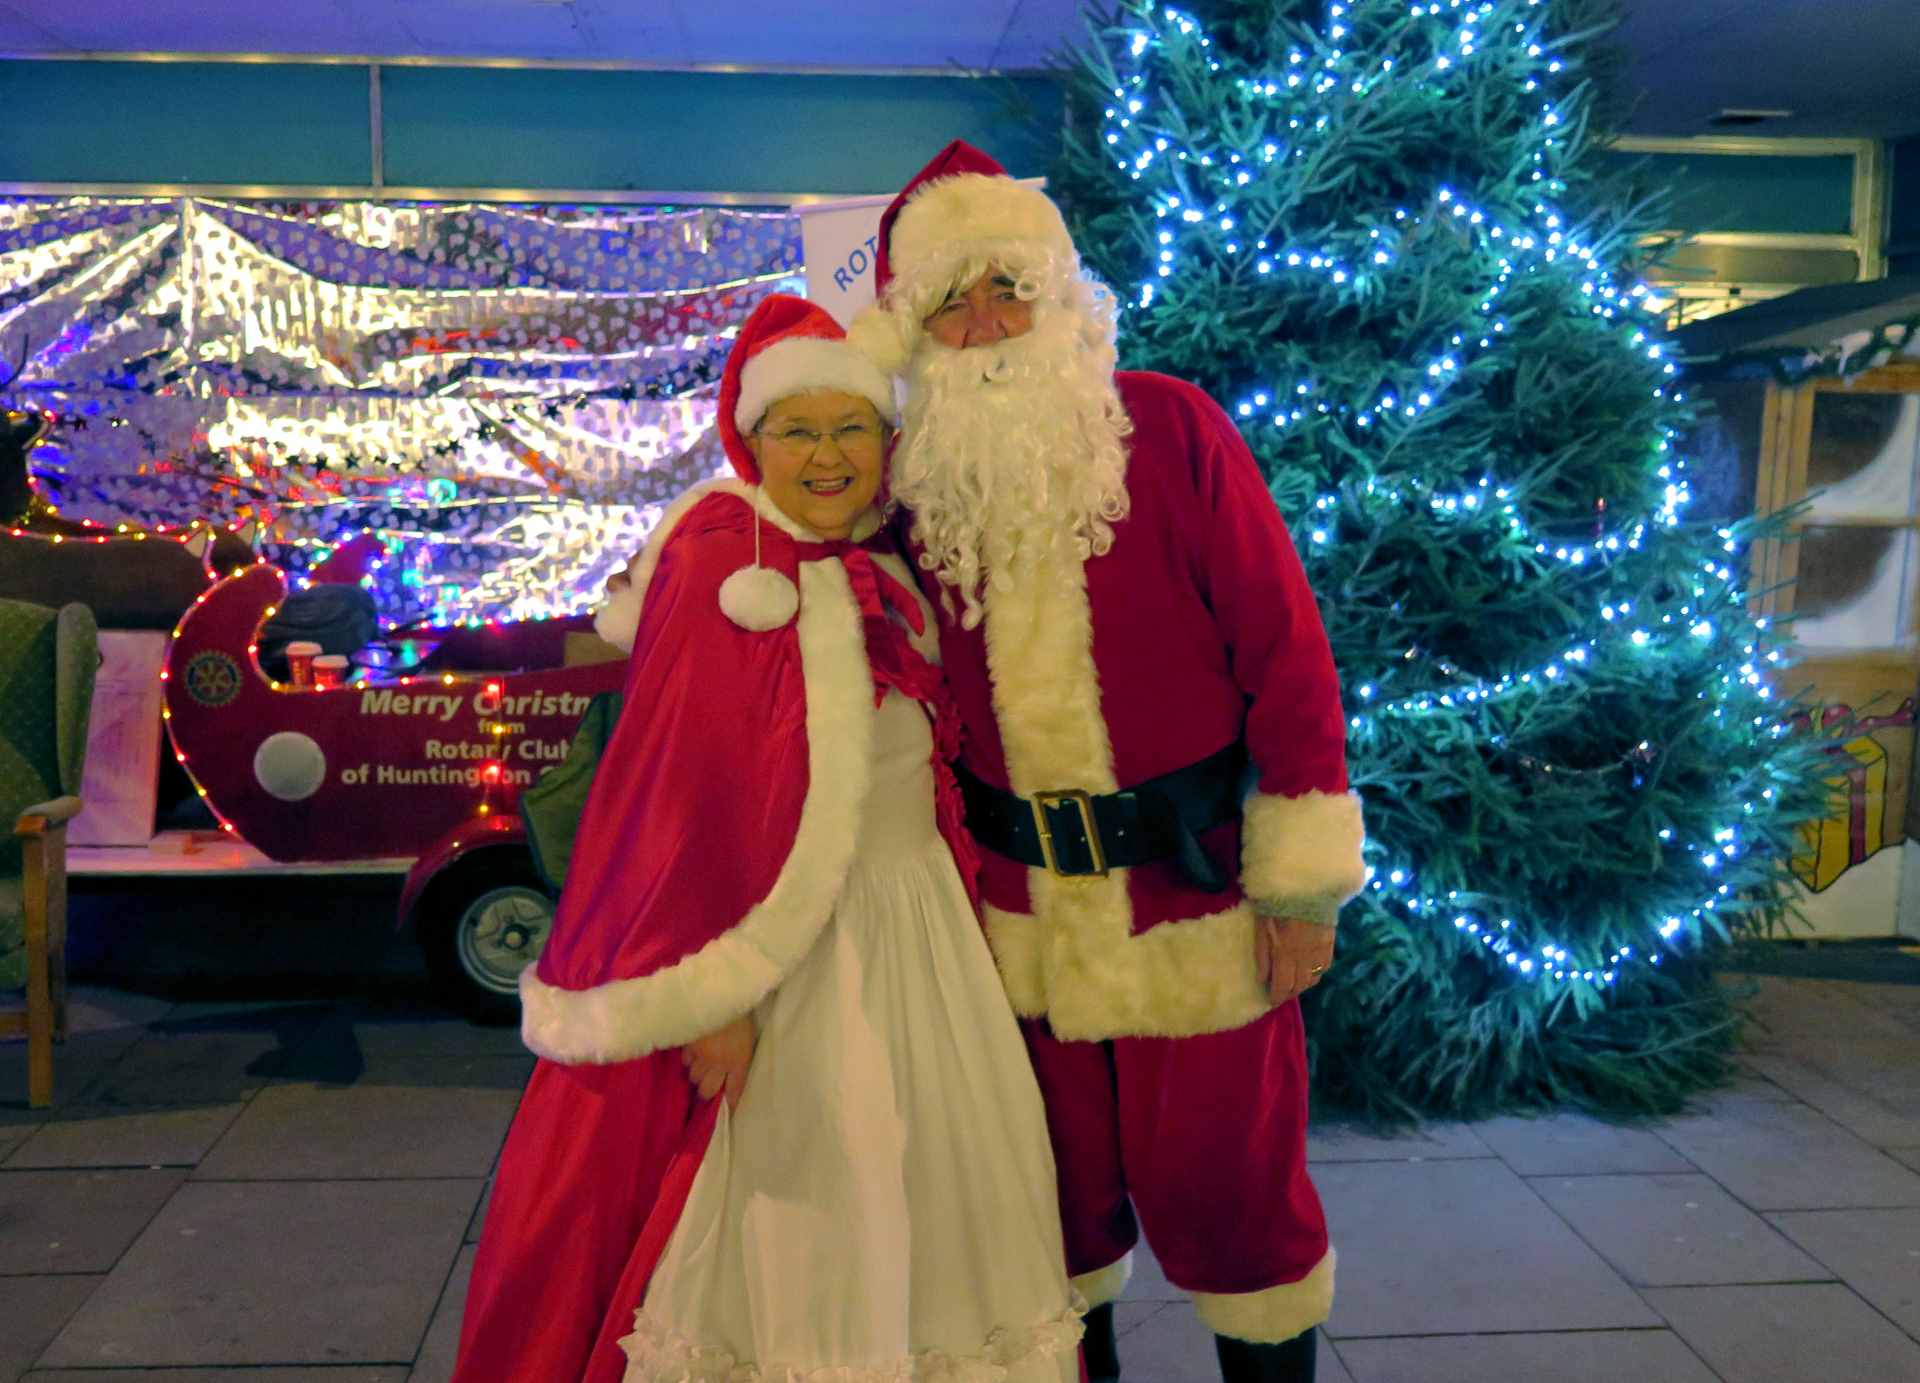 Mrs Clause and Father Christmas pose in front of a wooden red sleigh and a Christmas tree illuminated with blue lights.